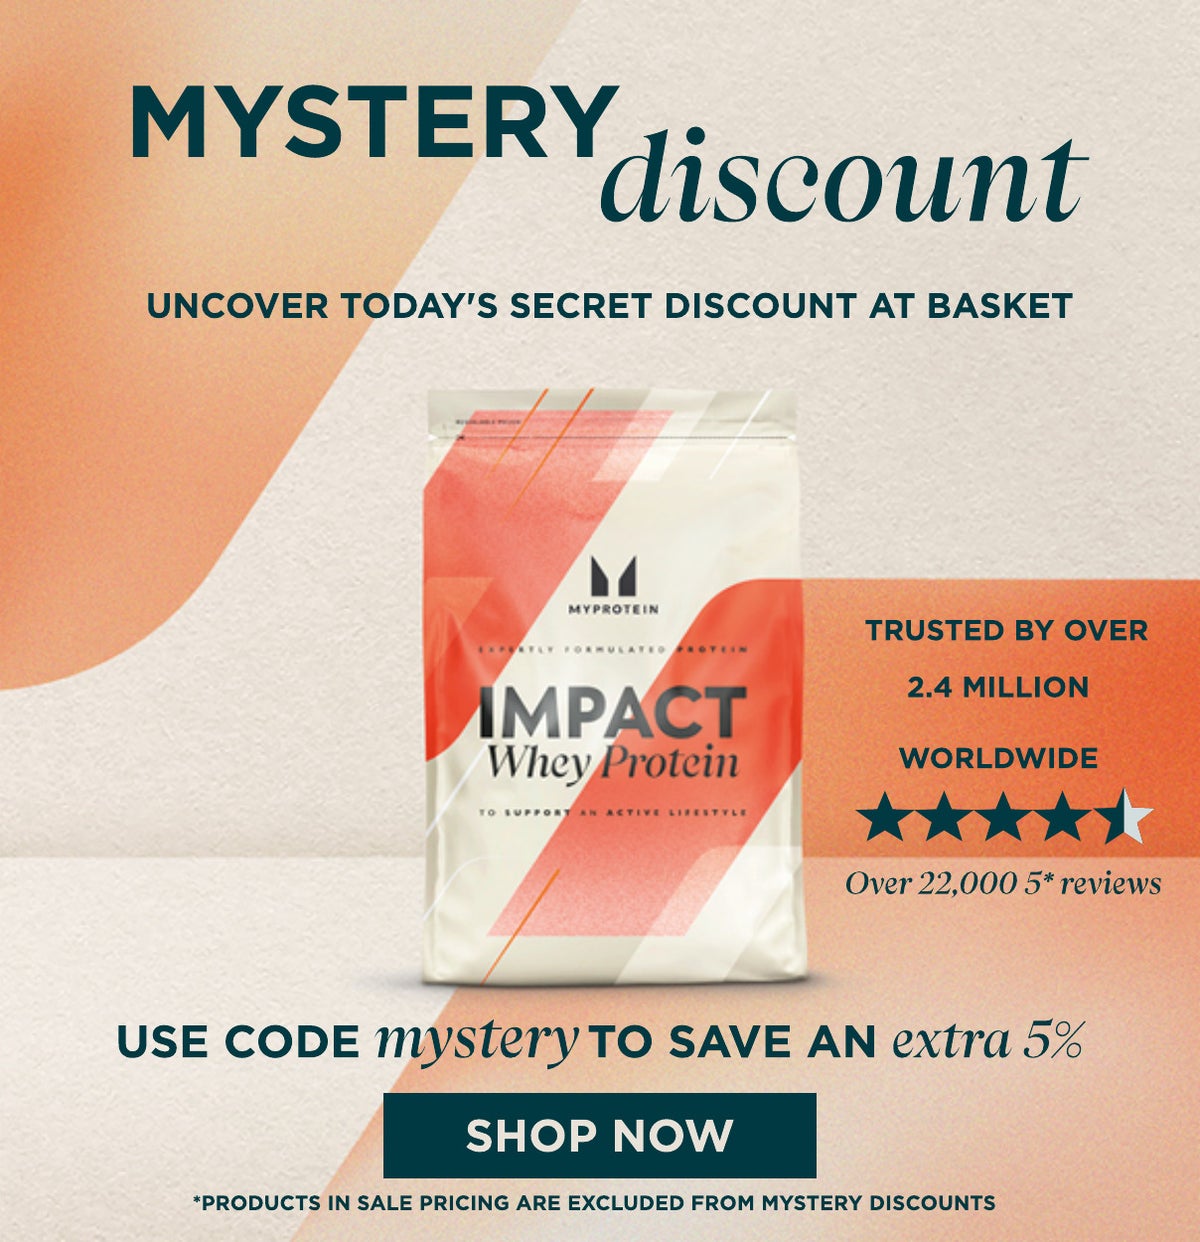 Mystery discount uncover today's secret discount at basket, plus save an extra 5% with code mystery. shop now.